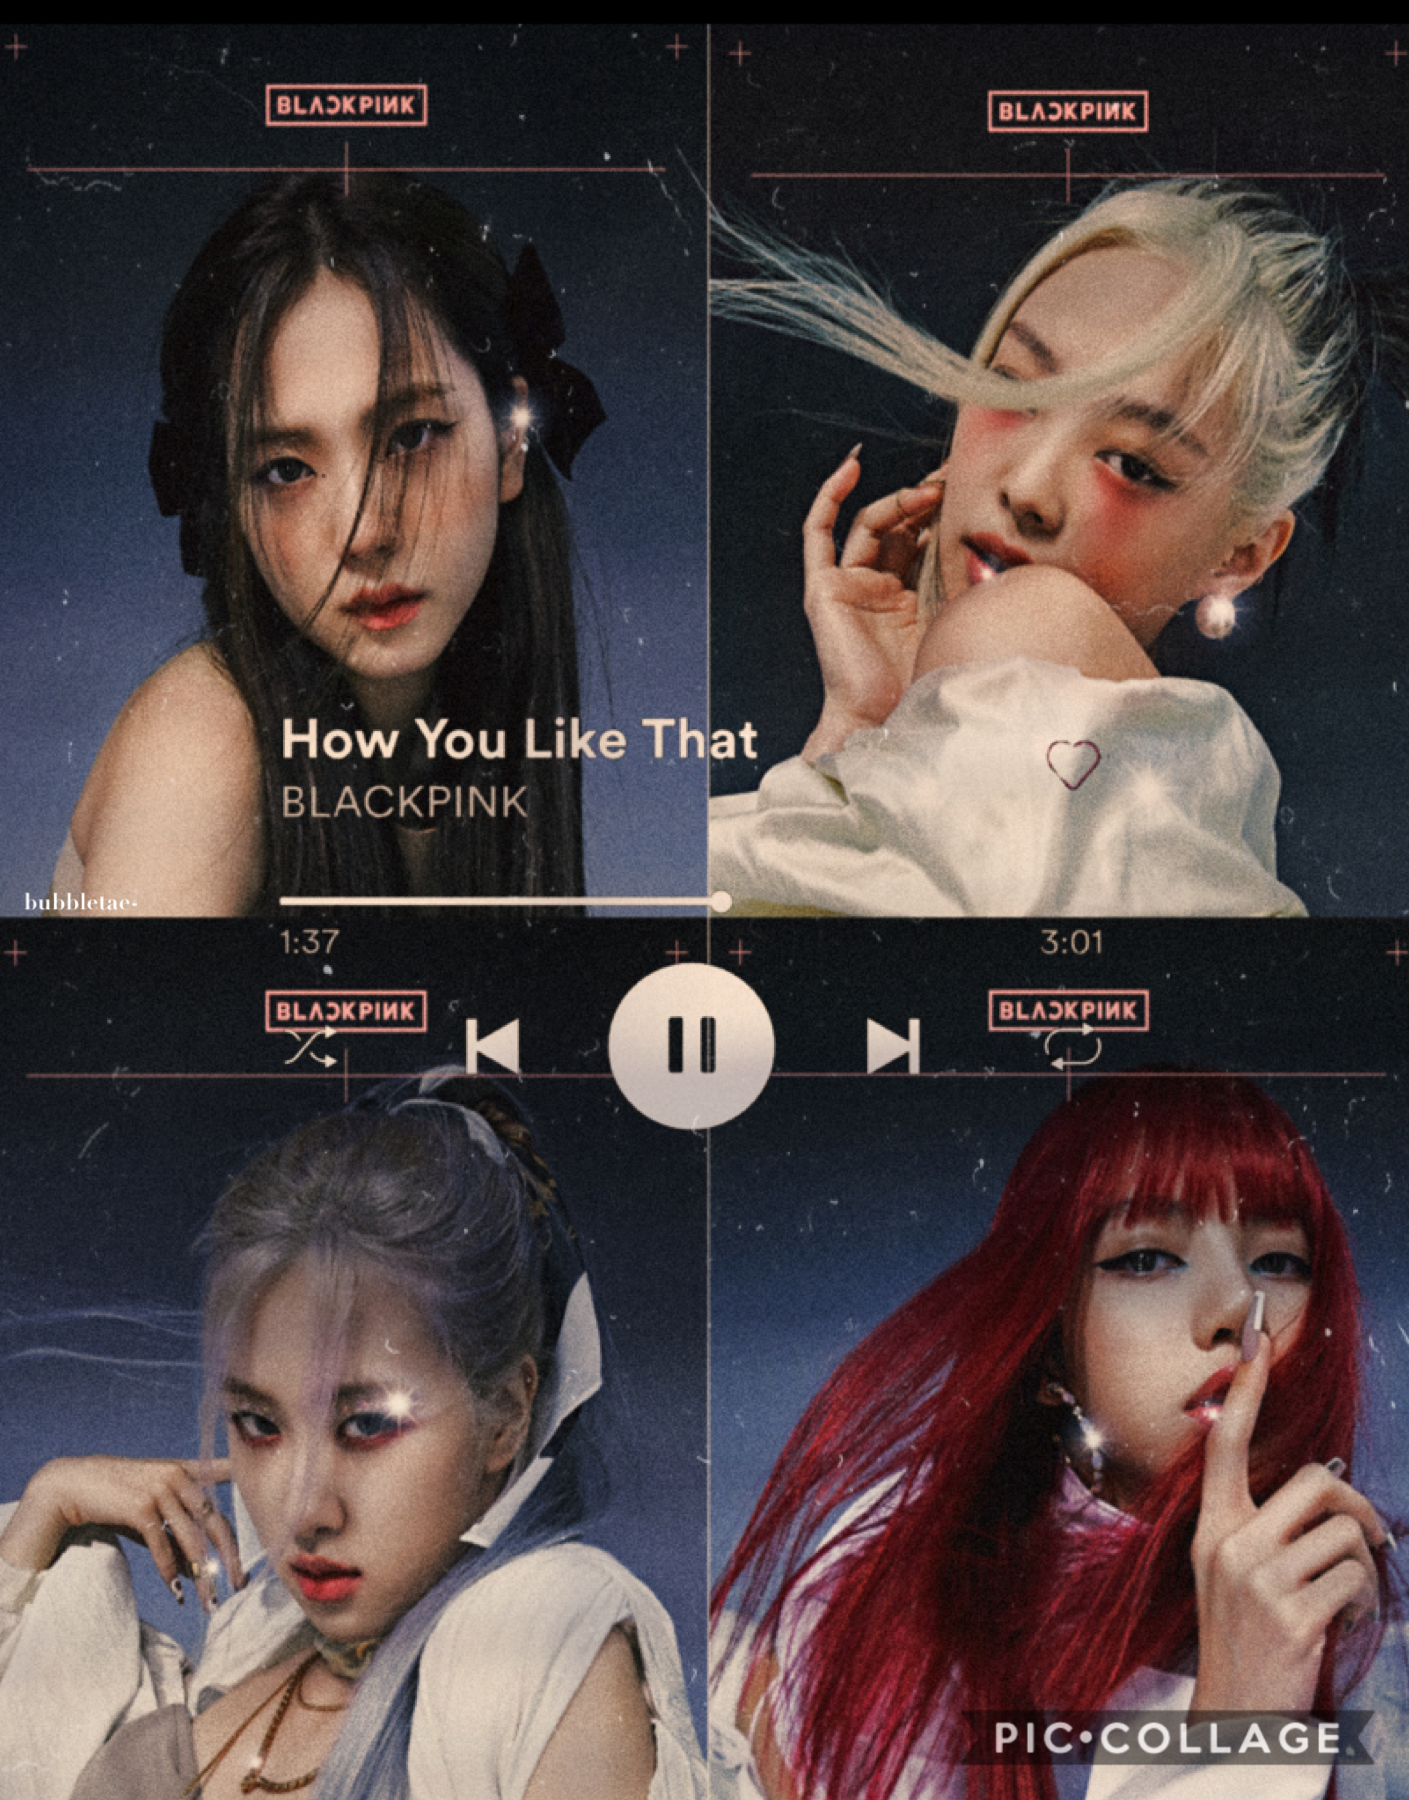 ✨
THIS COMEBACK WAS AMAZINGGGG!🤩👏

omg their new song is fire!! 🔥 our queens are back! 👑💕

my ears have been blessed 😂